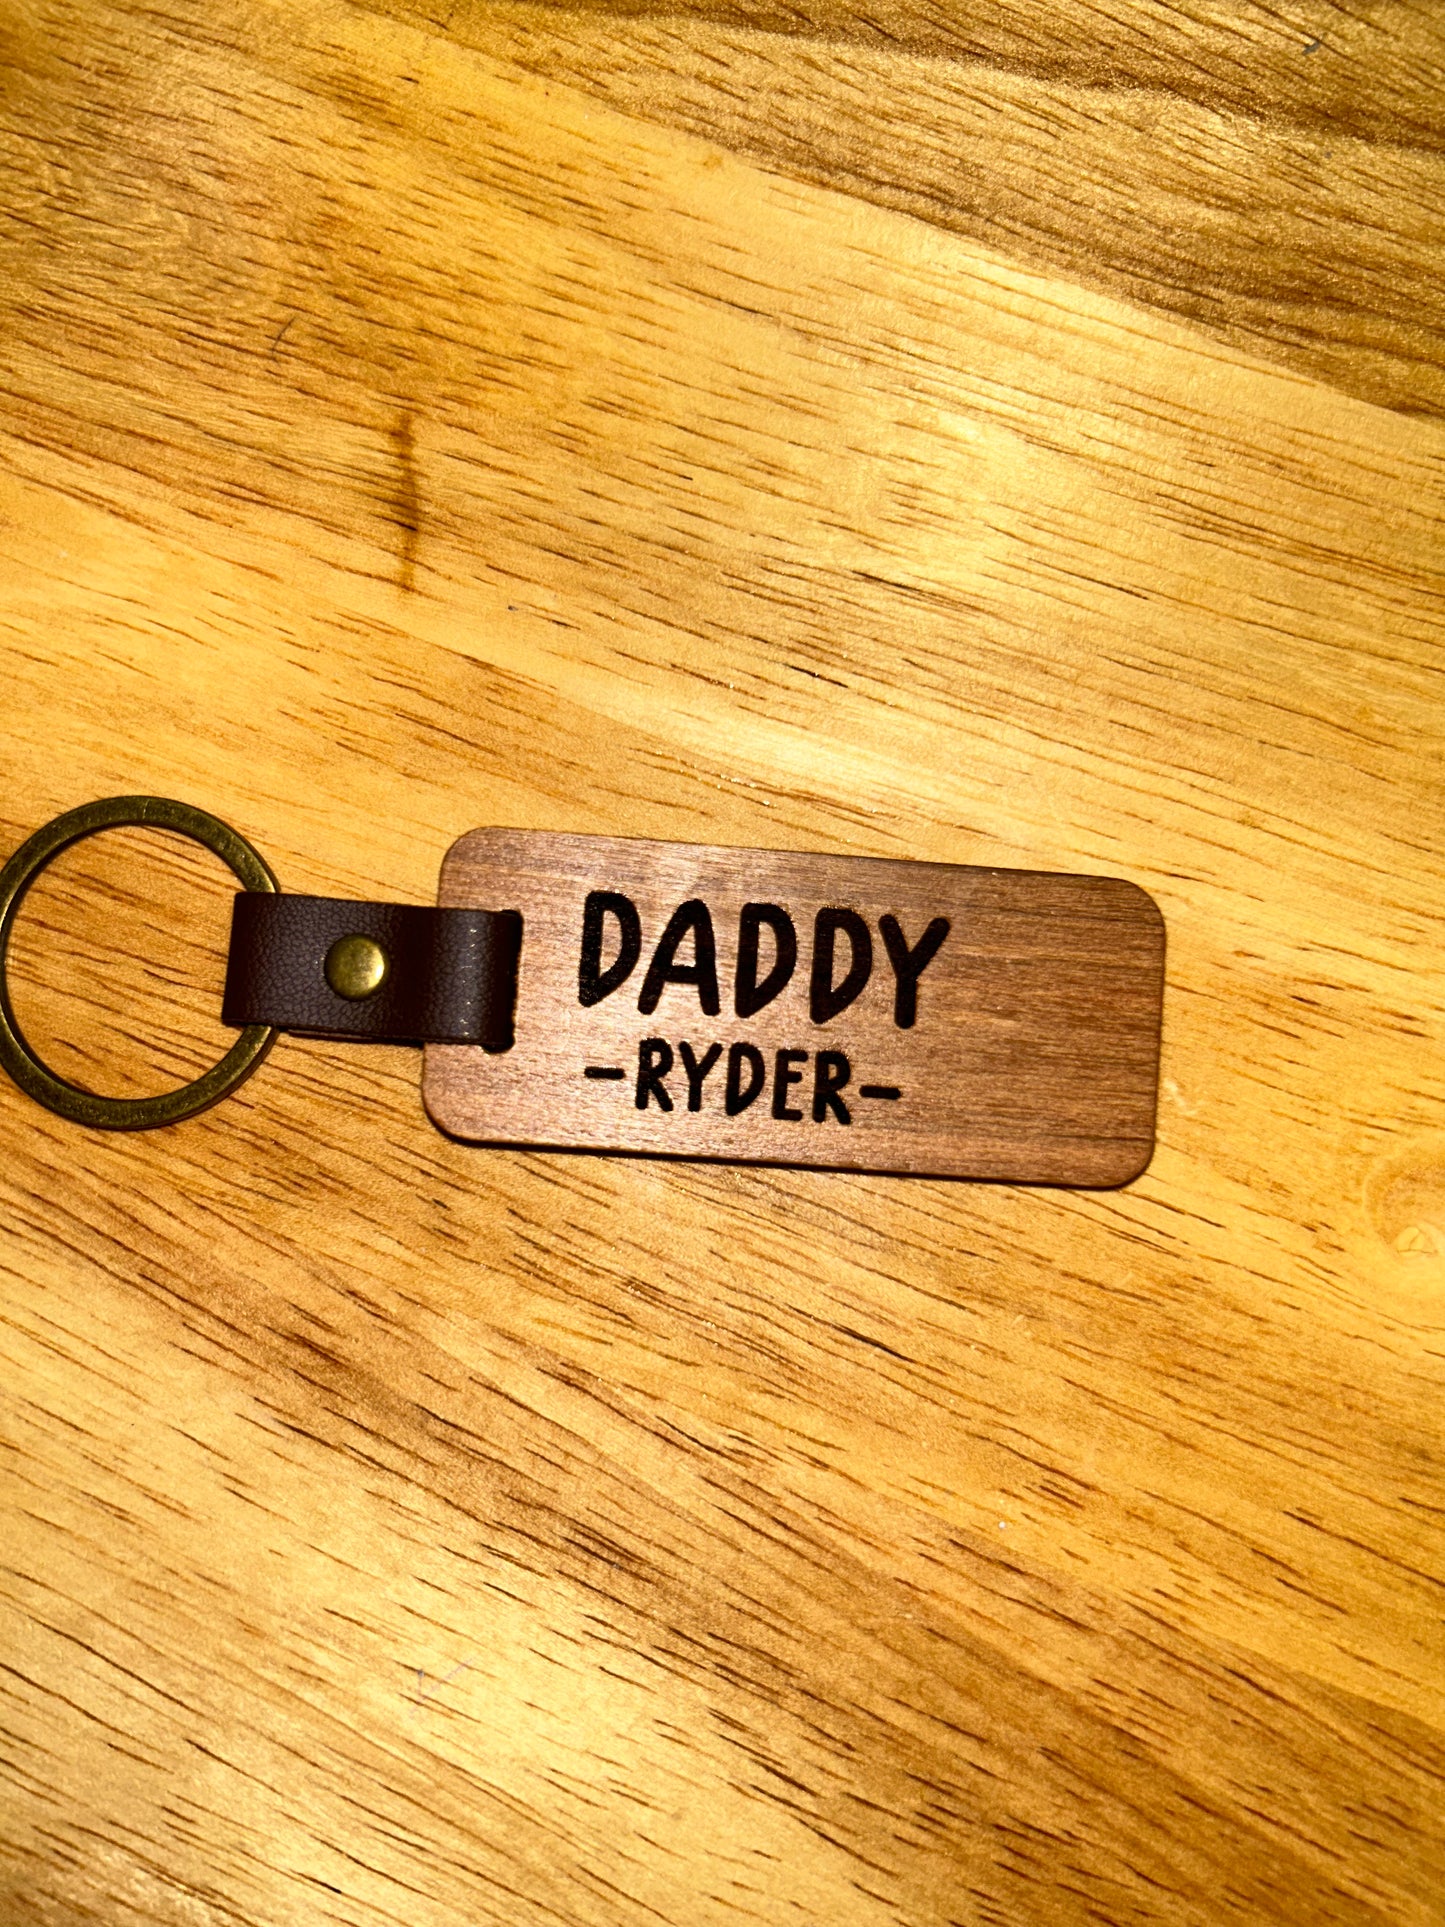 Engraved wooden keychains